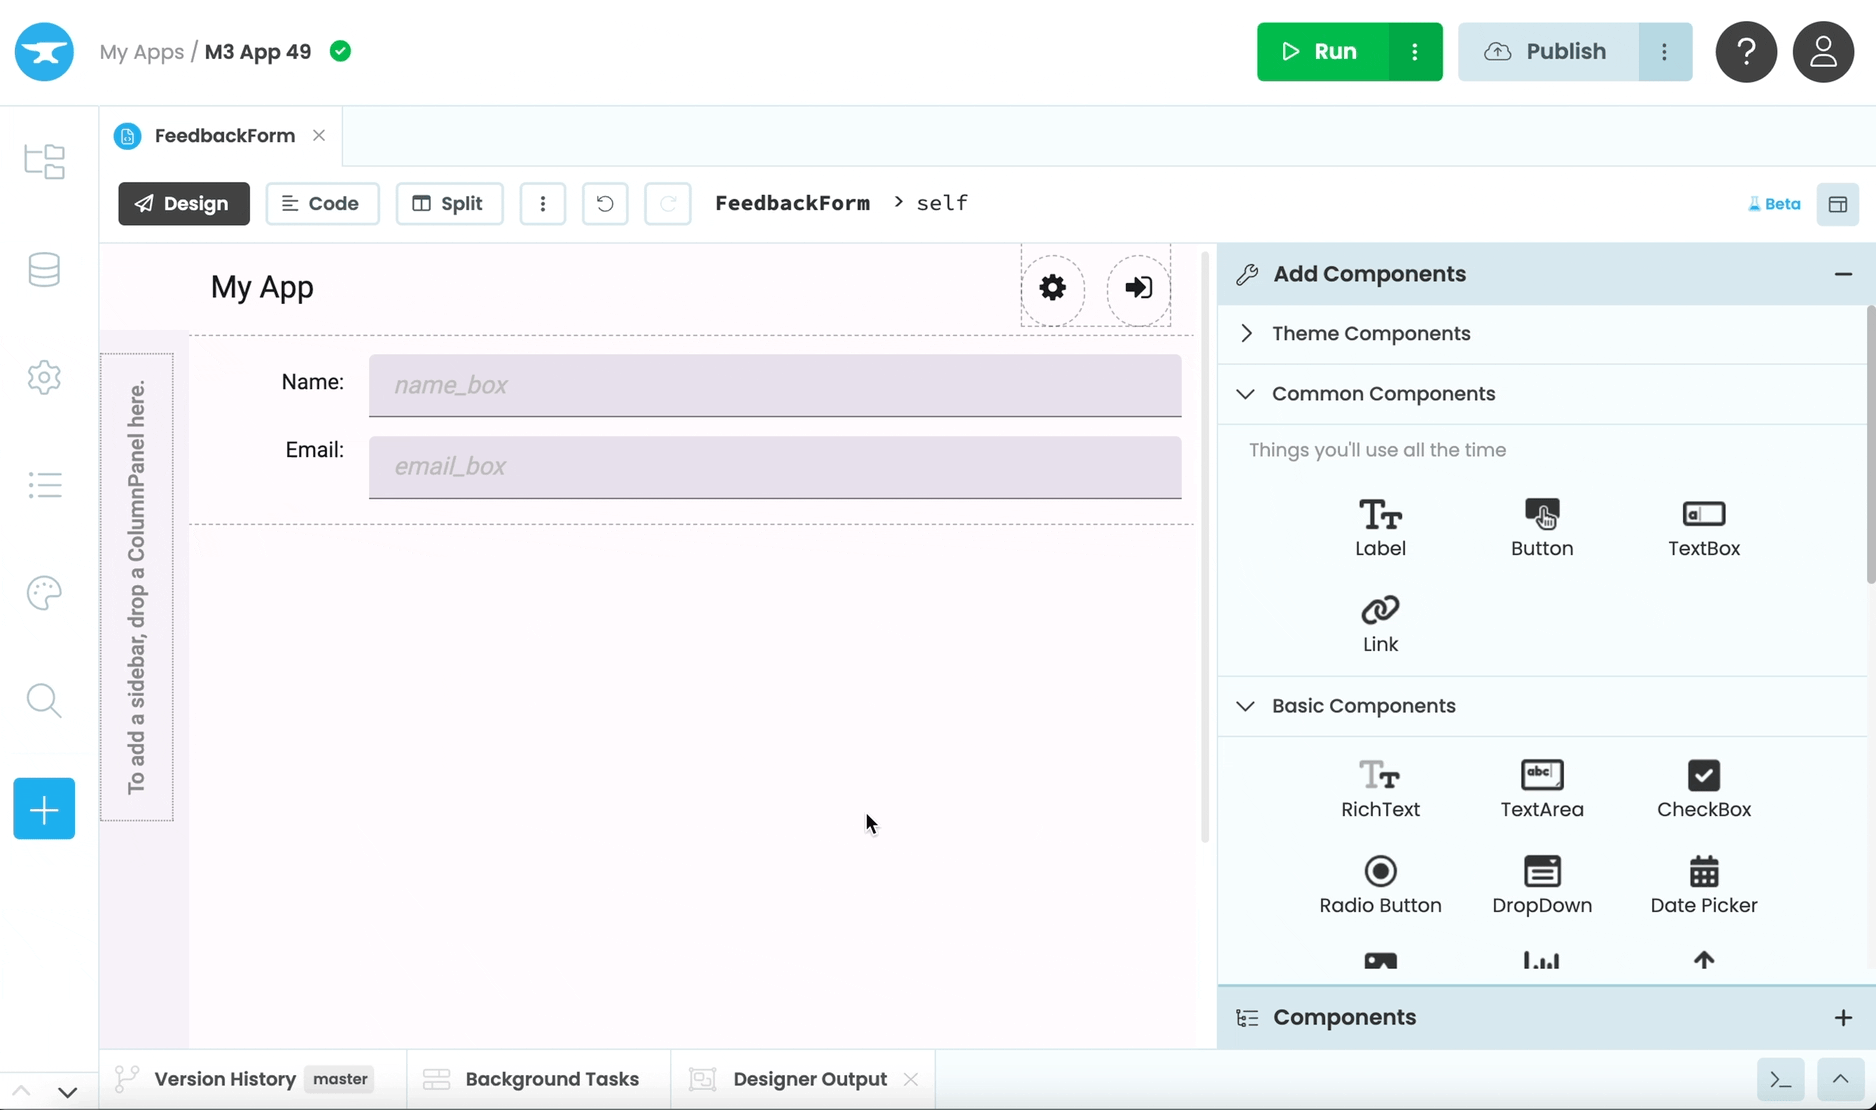 Adding a Button component to the Form and editing its properties from the Object Palette and Properties Panel in the new Beta Drag-and-Drop Designer